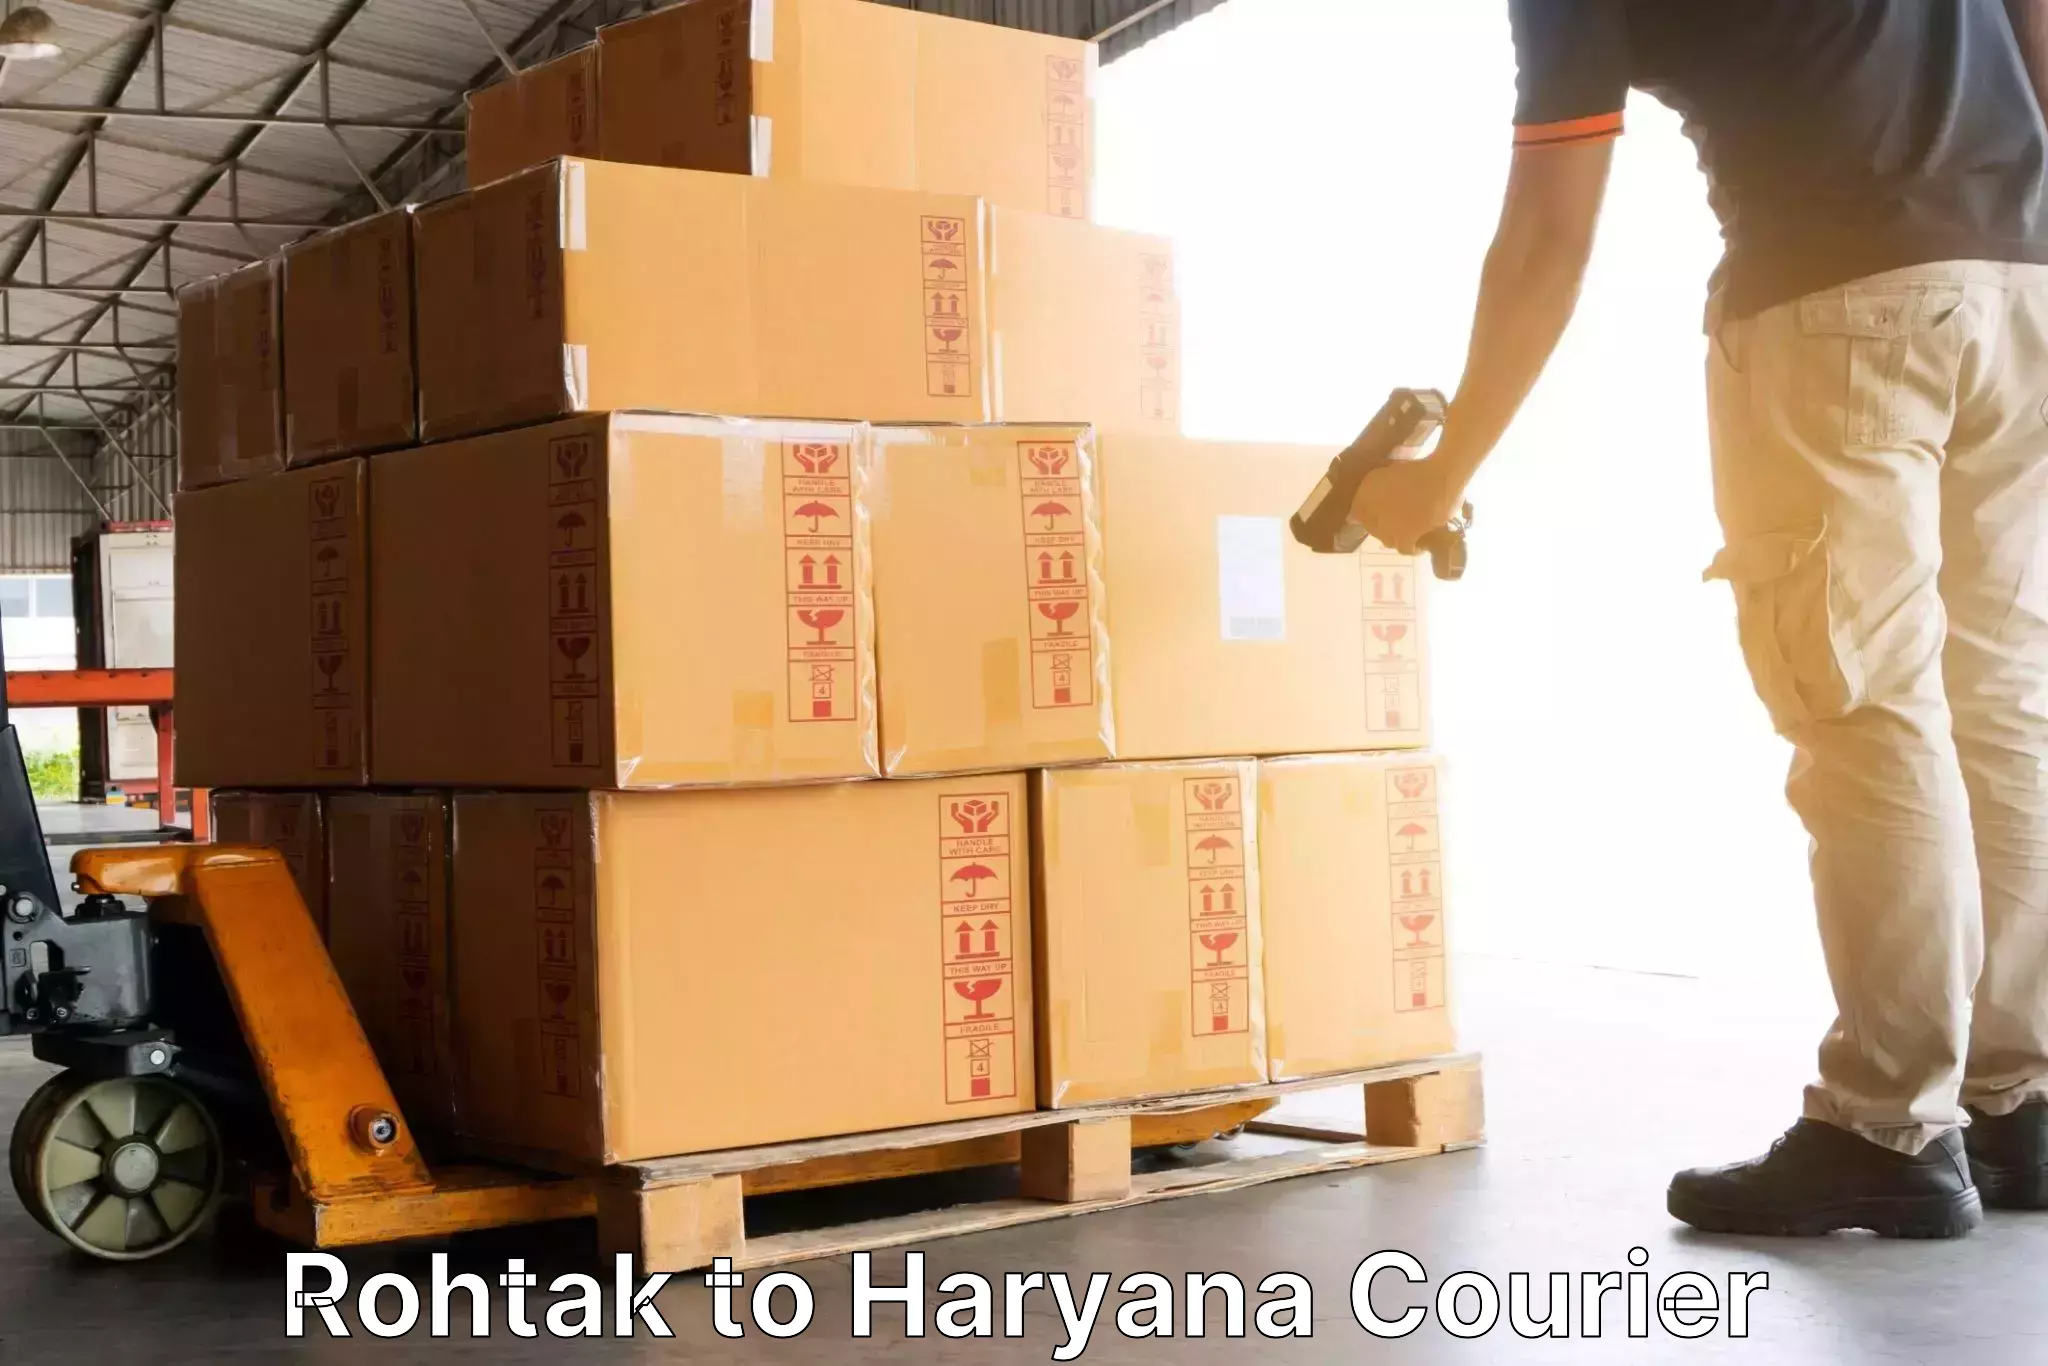 Efficient cargo services Rohtak to Panipat